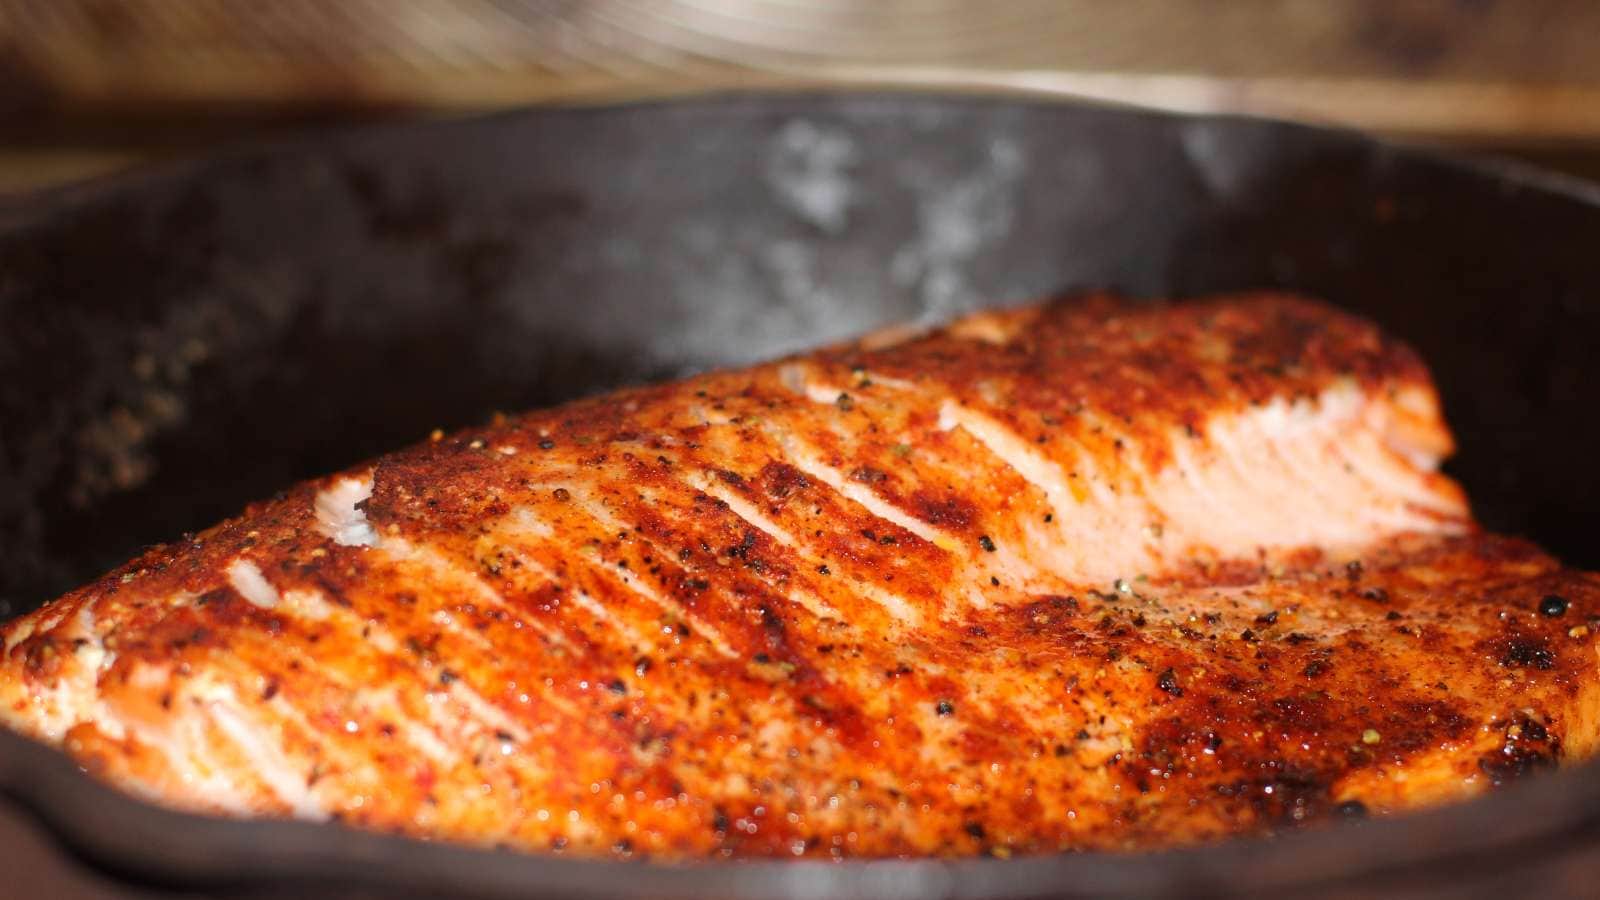 Broiled Salmon recipe by Cheerful Cook.